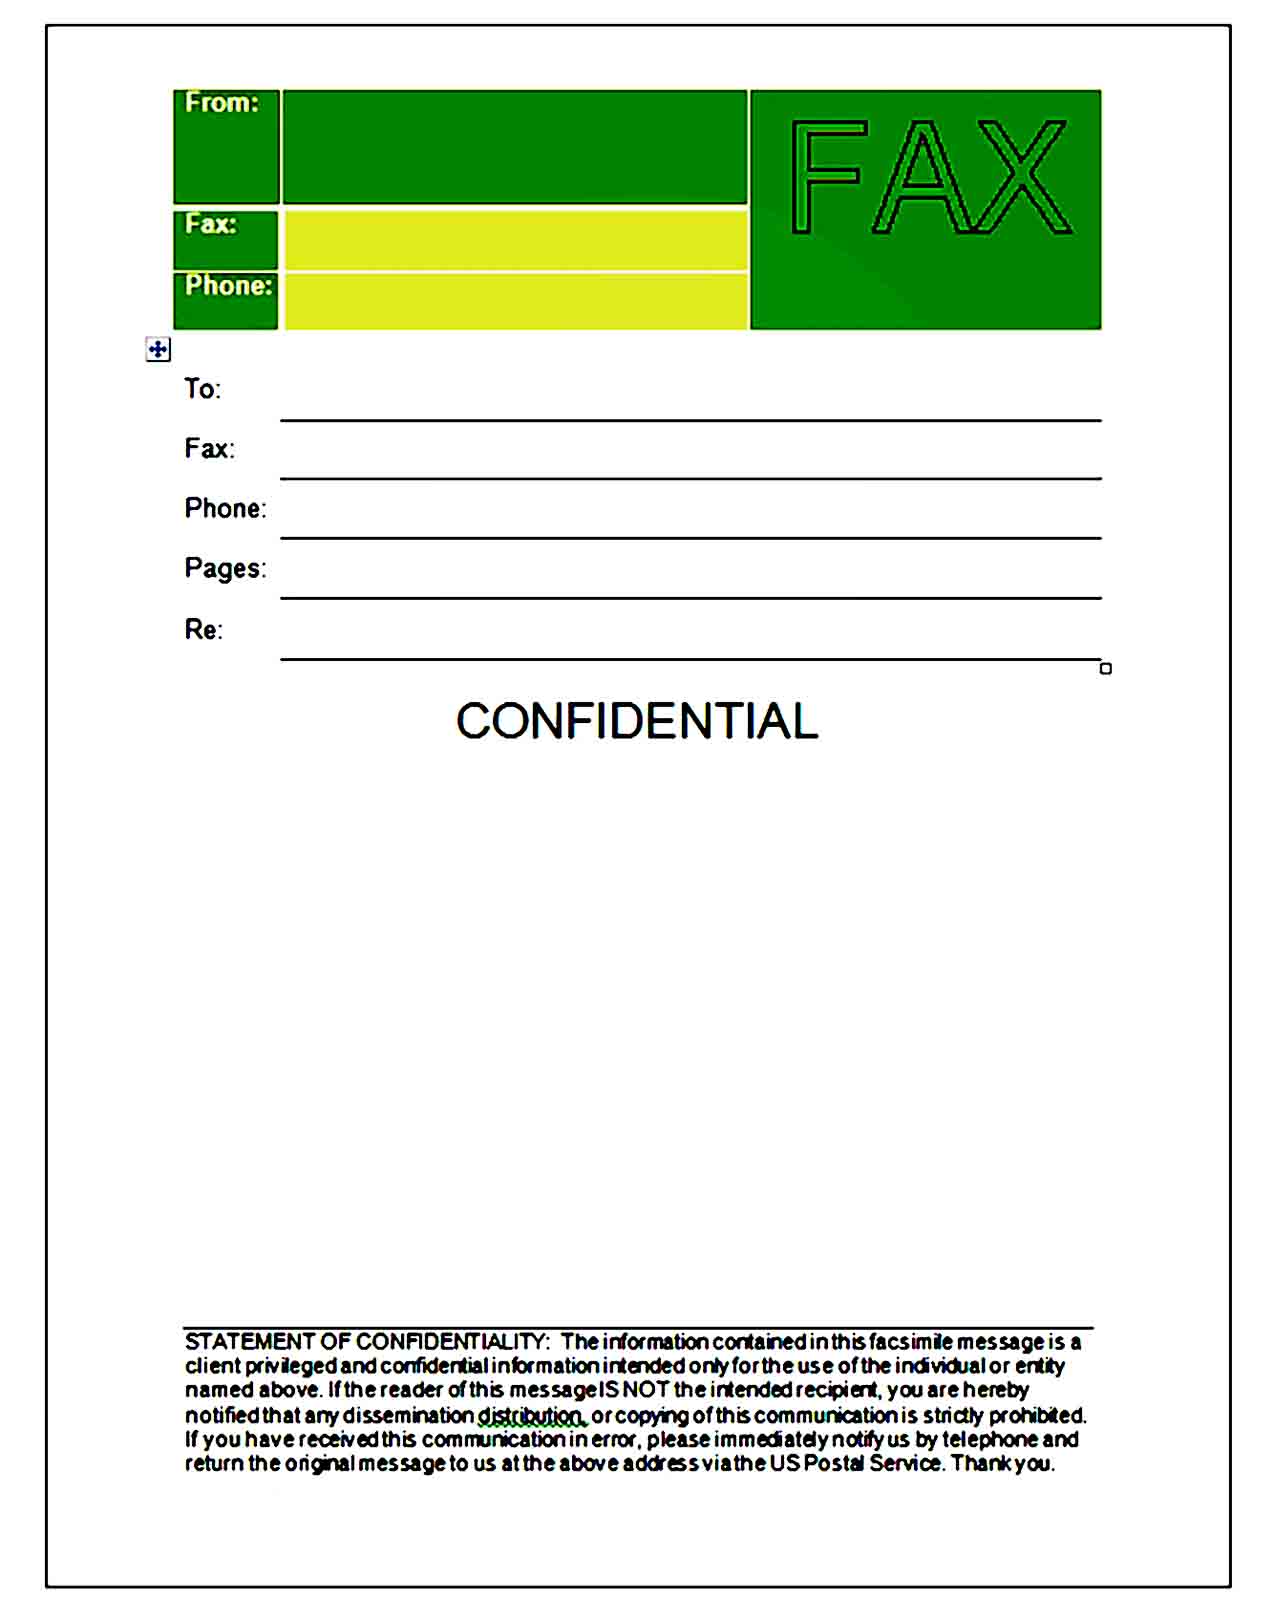 Fax Cover Sheet Template 02